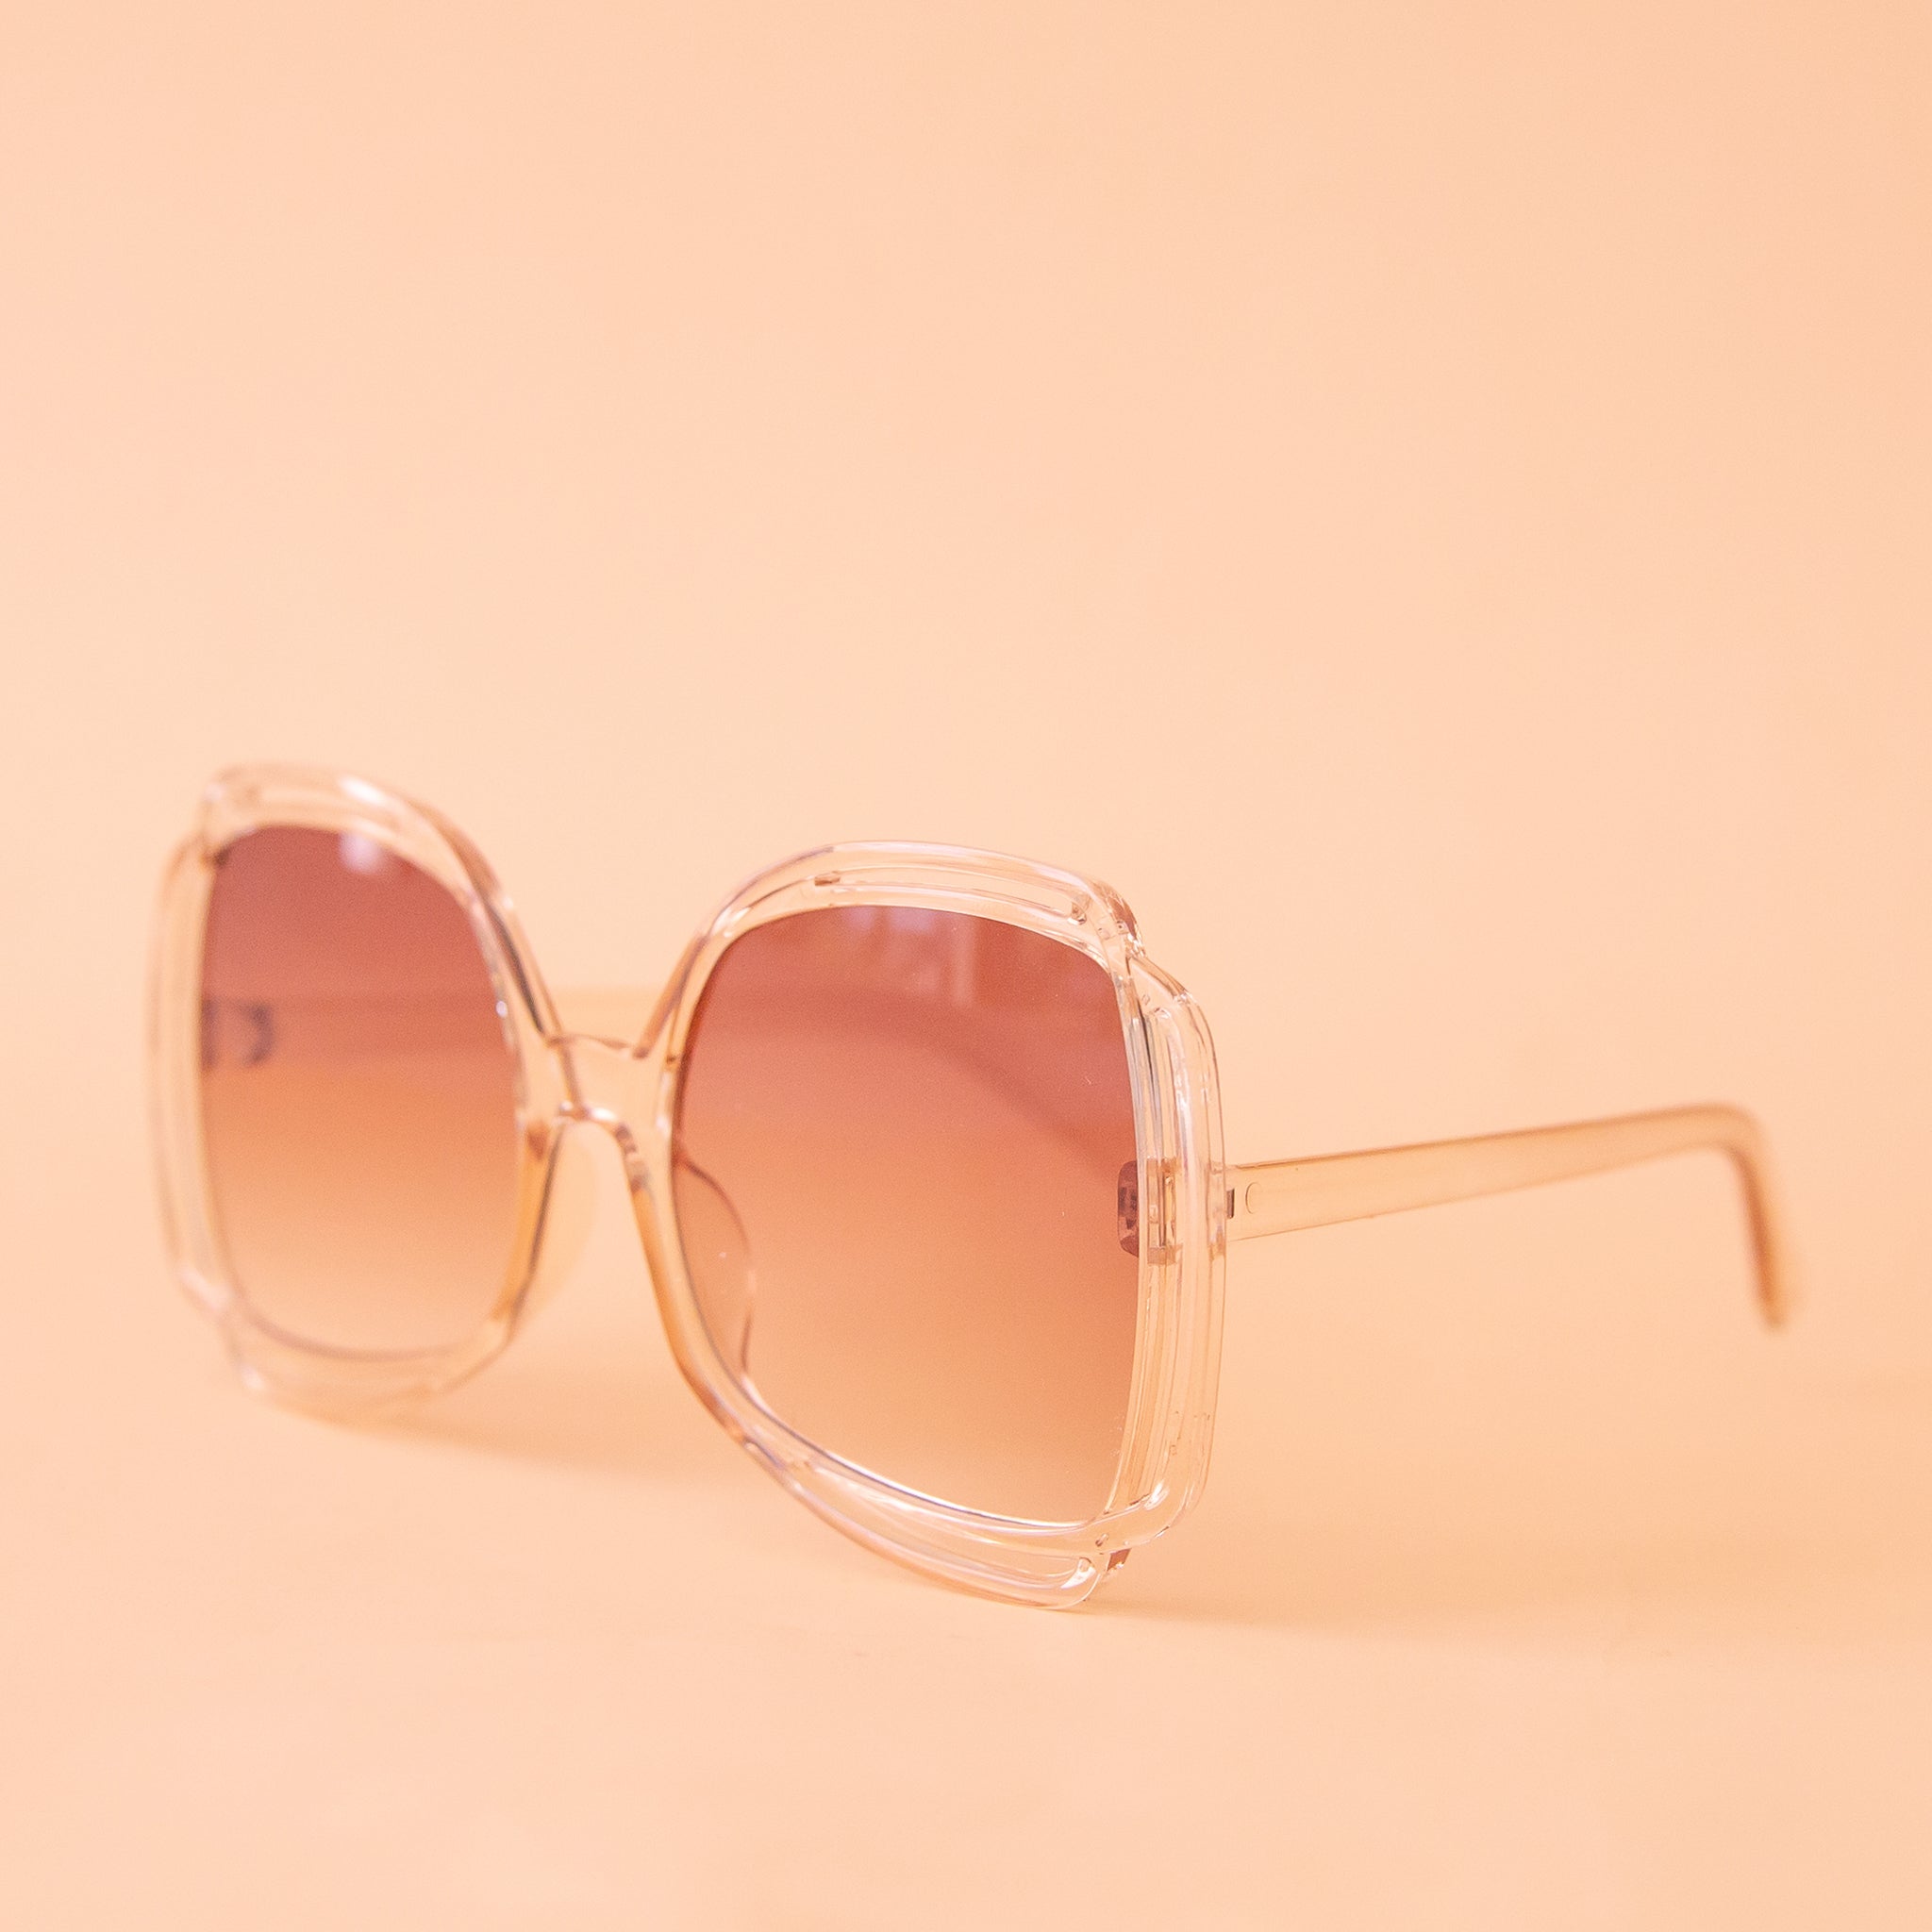 A pair of sunglasses with a clear peachy frame and pinkish gradient lenses.